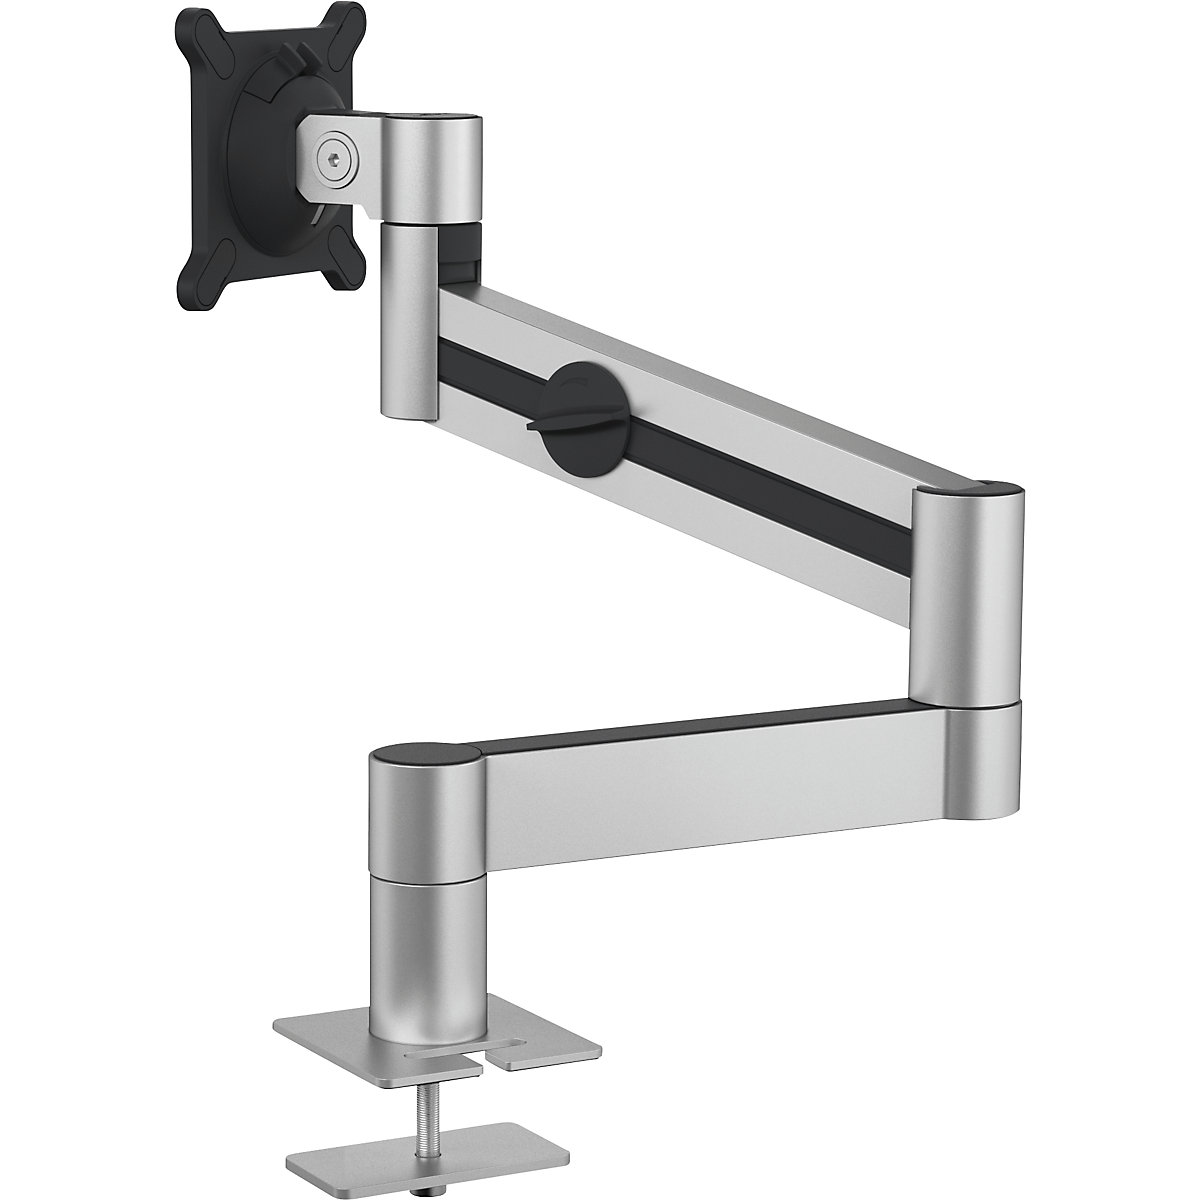 Monitor holder with arm for 1 monitor – DURABLE, HxWxD 470 x 345 x 120 mm, through-desk mounting-30